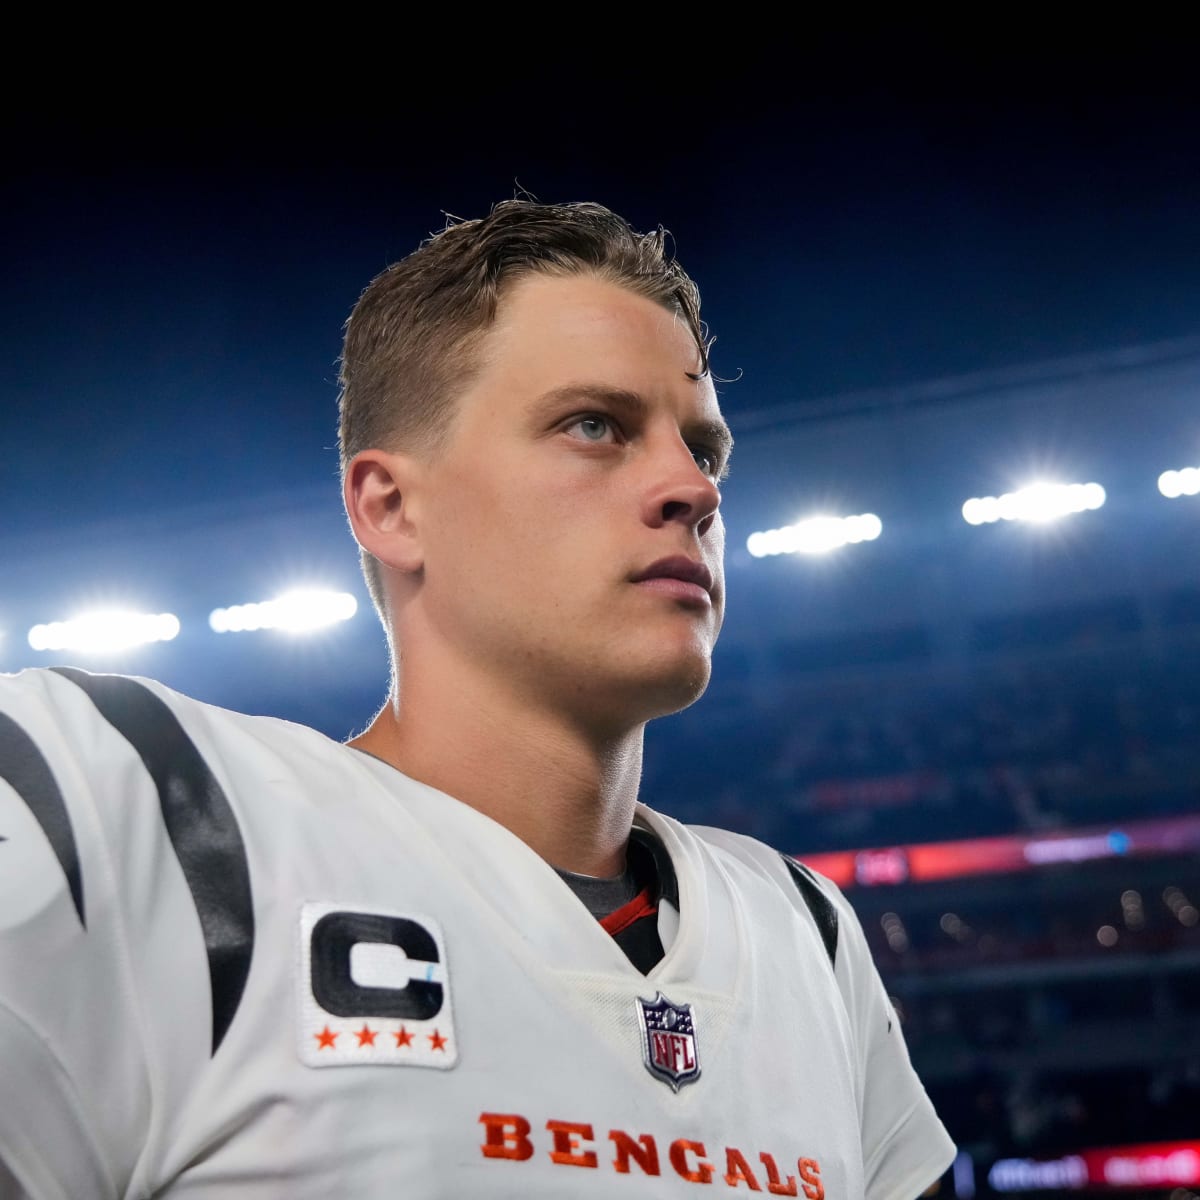 Joe Burrow: There's Always Room To Improve During Every Offseason